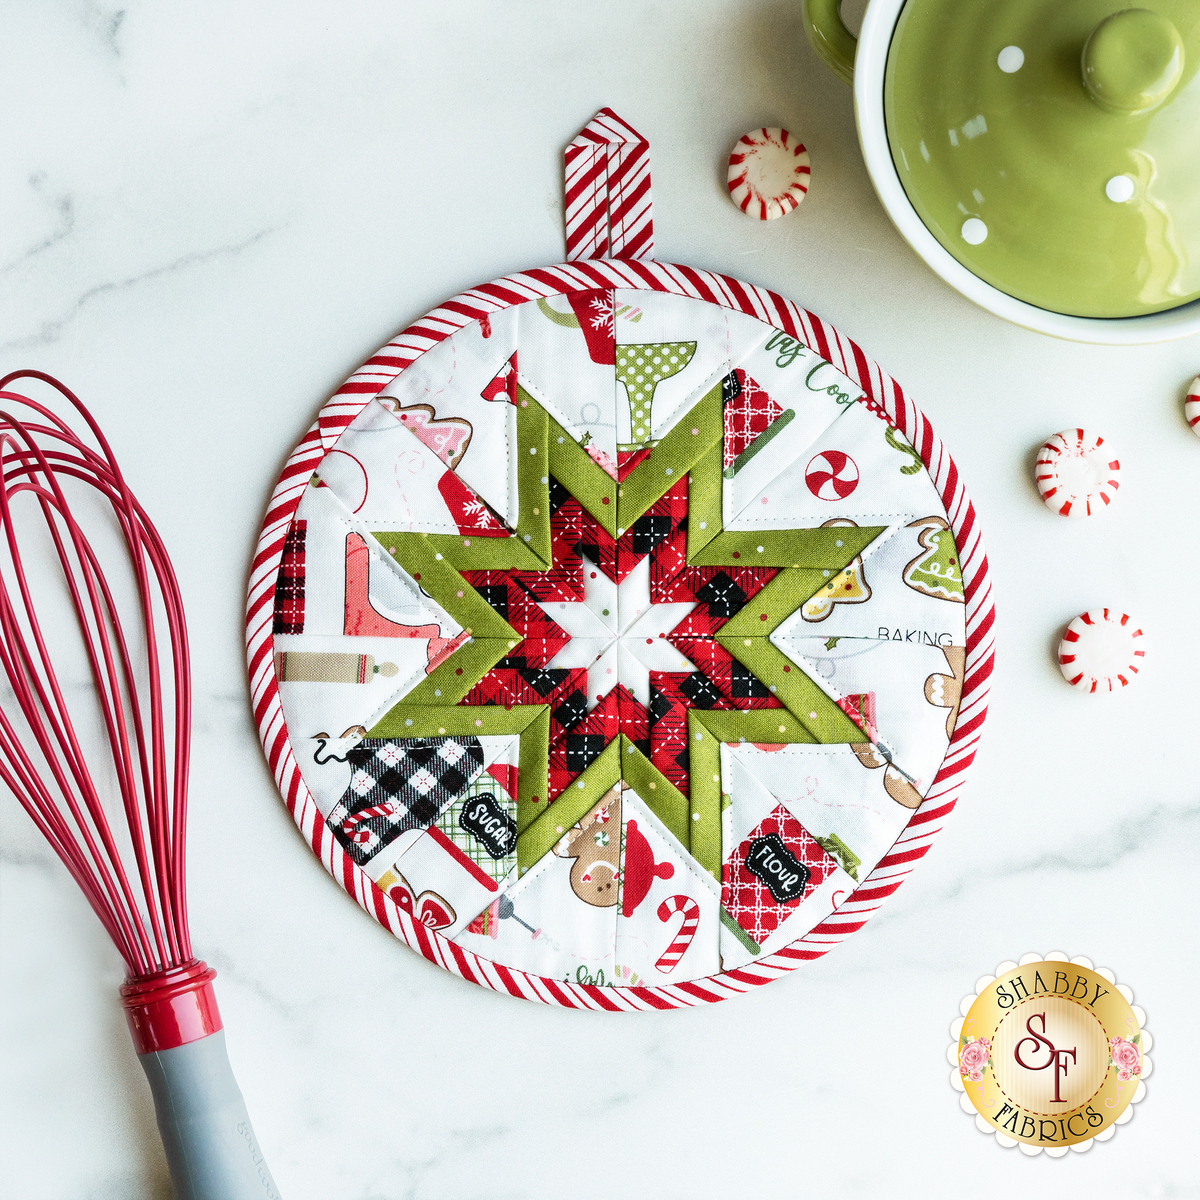 Deb's Days: Make a Santa Potholder for Your Christmas Baking - A Cute  Christmas Kitchen Sewing Project